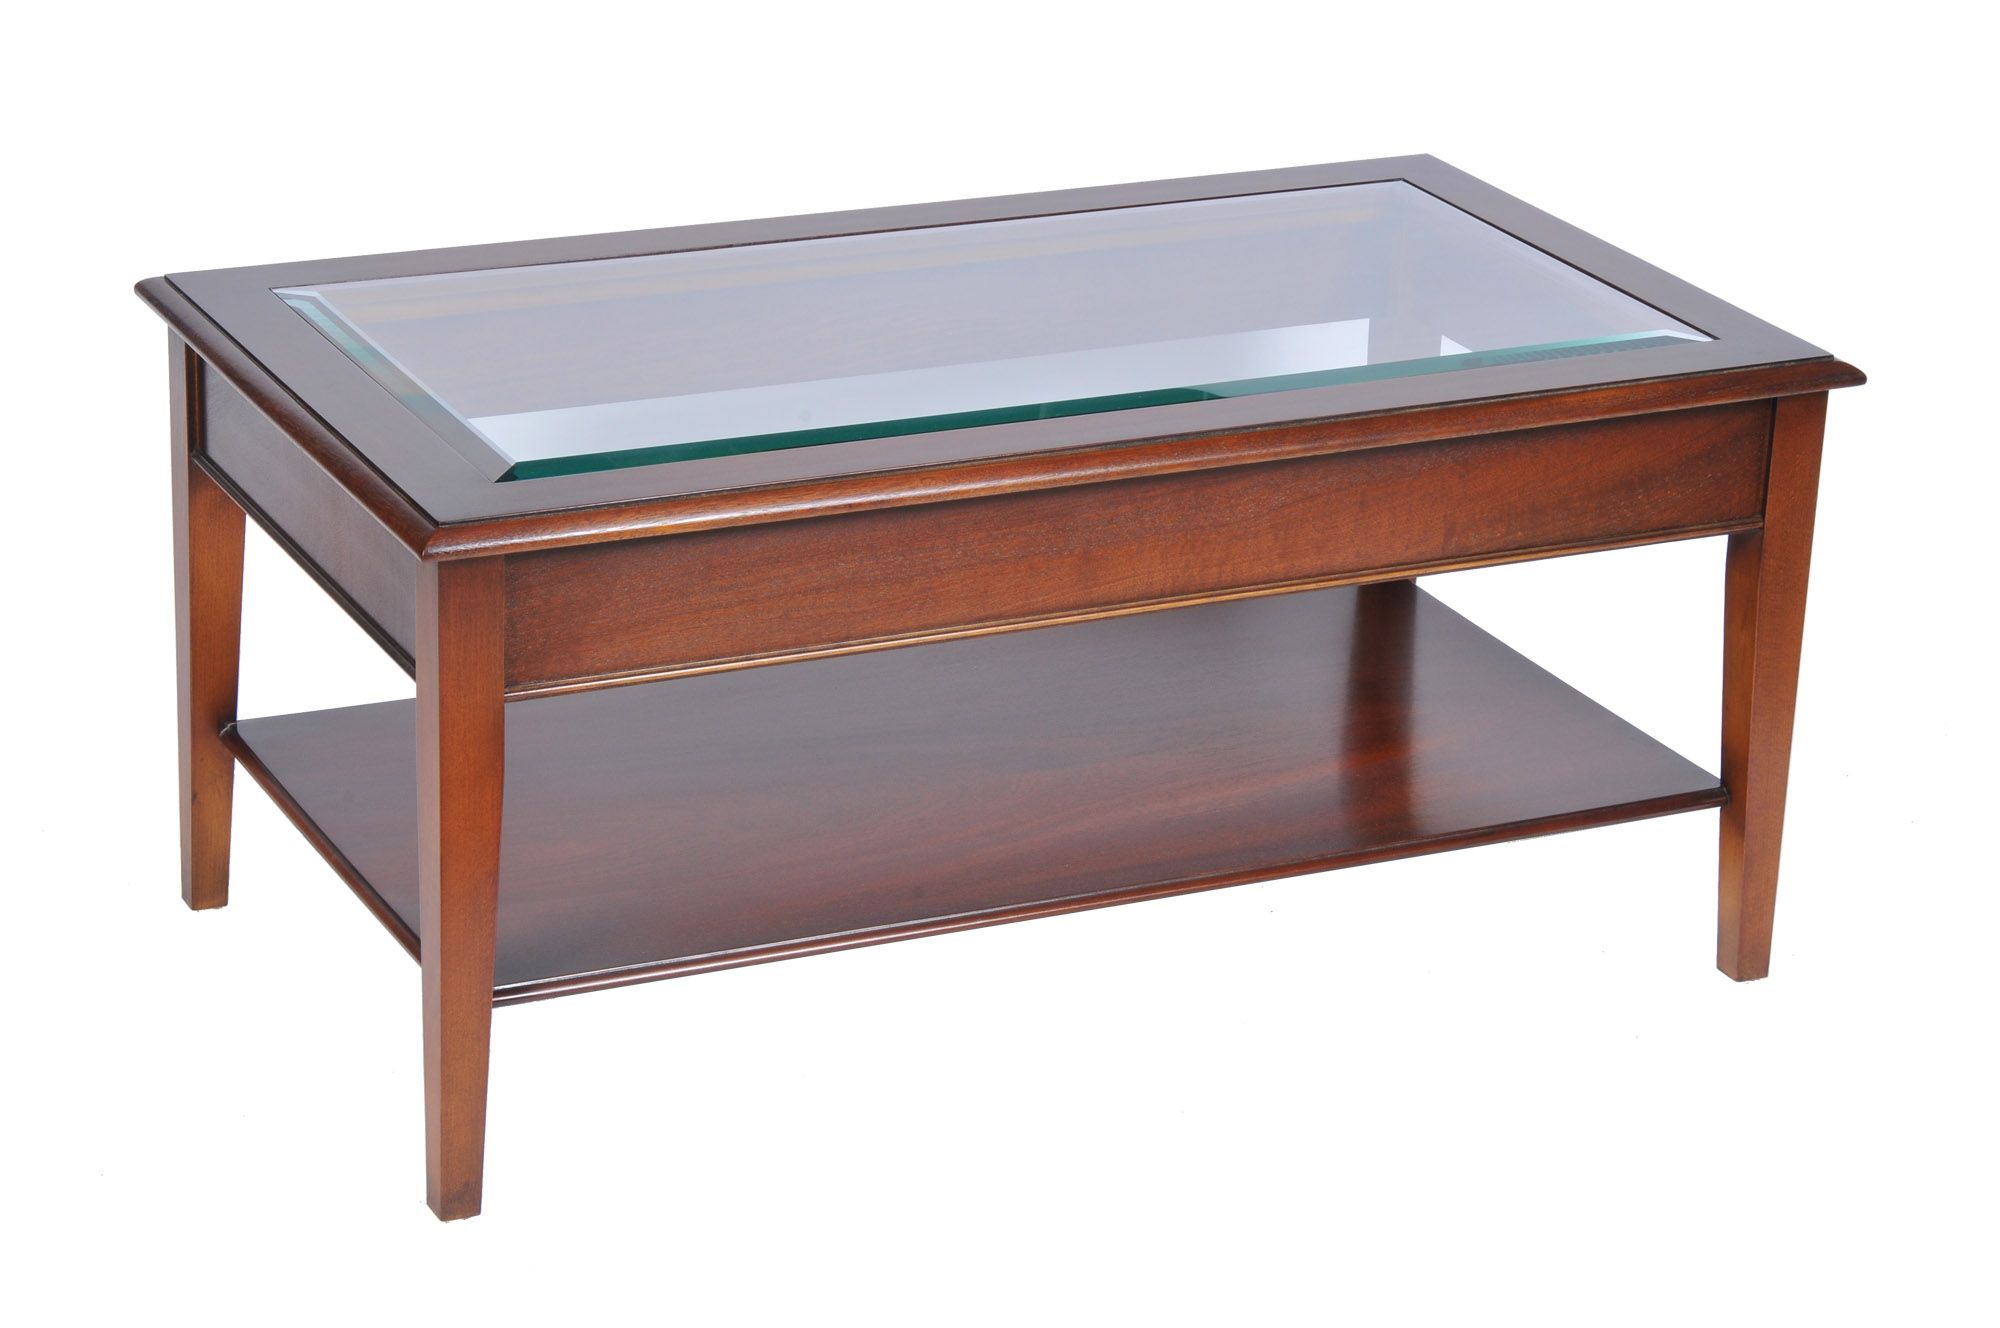 Bradley Mahogany 875 Glass Top Coffee Table – Tr Hayes Furniture Bath Intended For Smooth Top Coffee Tables (View 10 of 20)